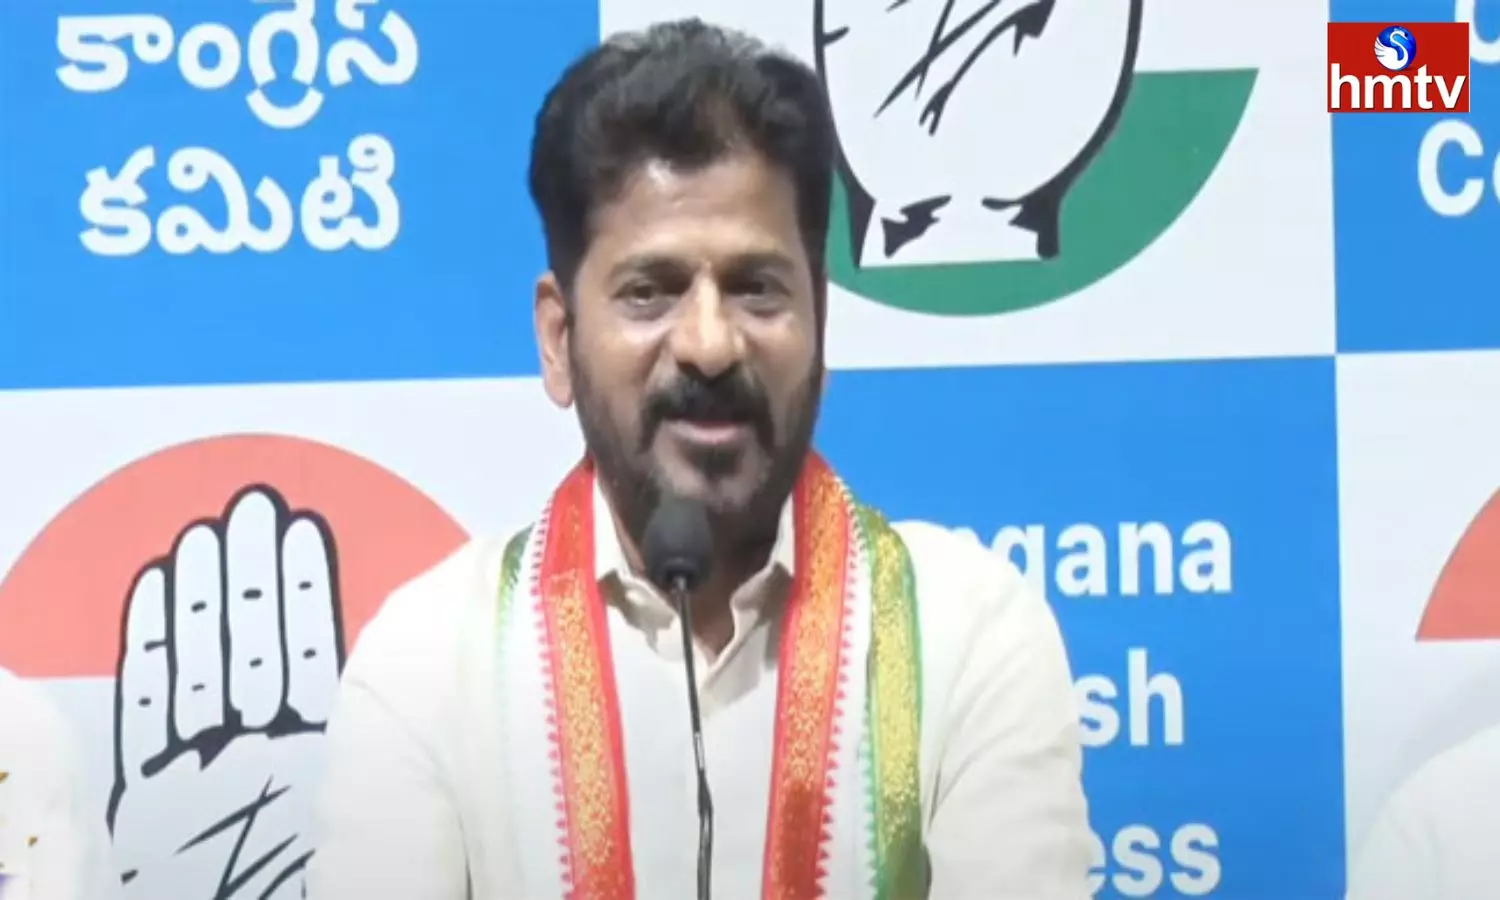 Revanth Reddy Responded for the First Time on the Phone Tapping Issue